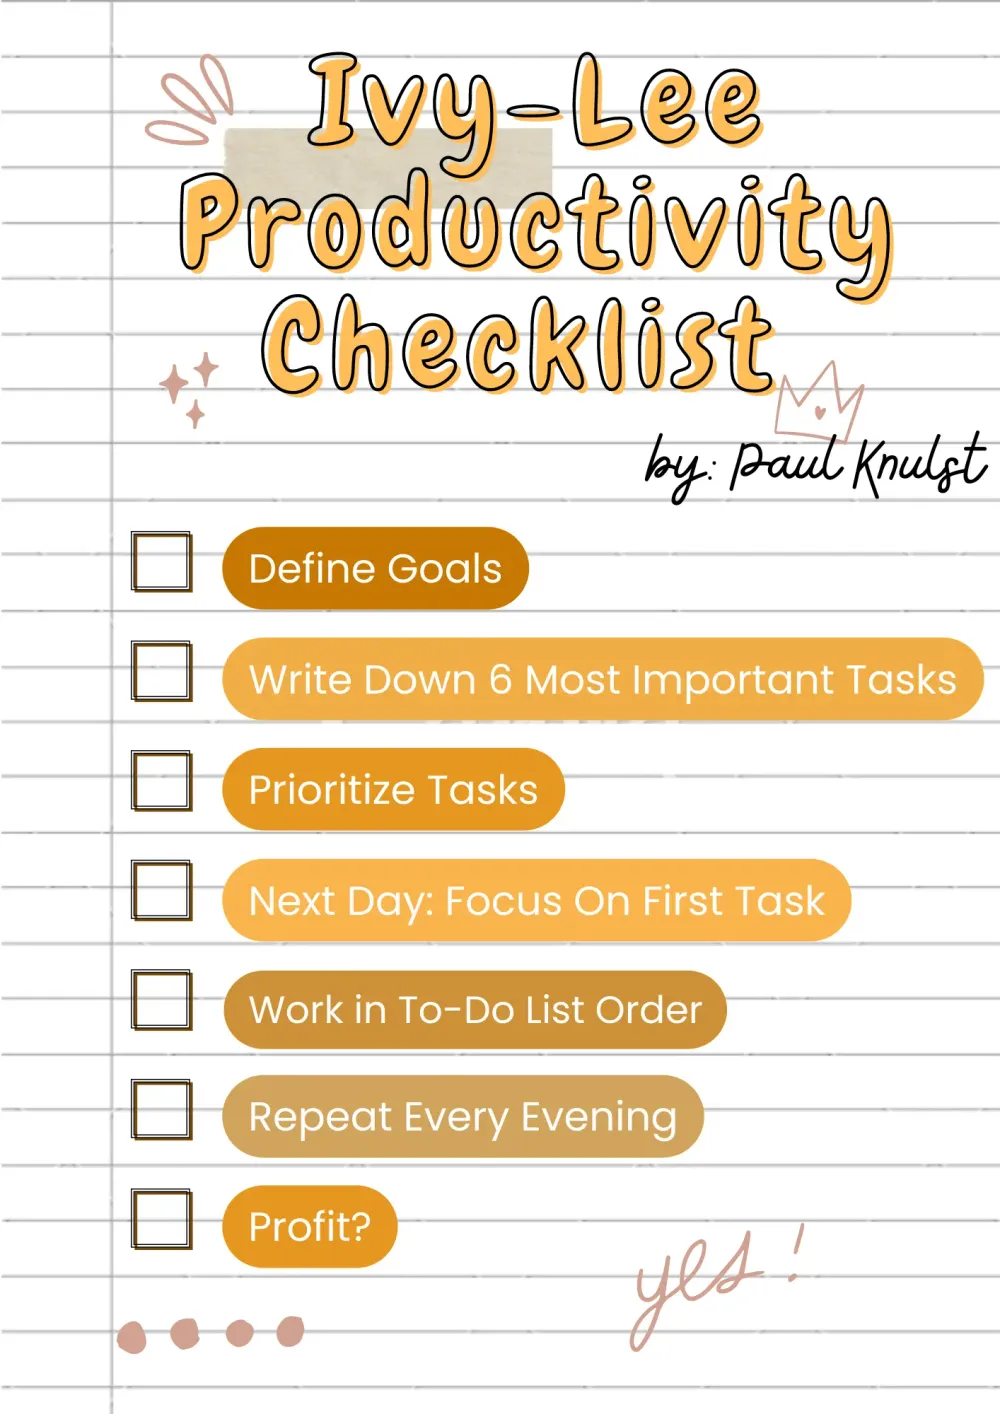 An Ivy-Lee Productivity Checklist for daily work